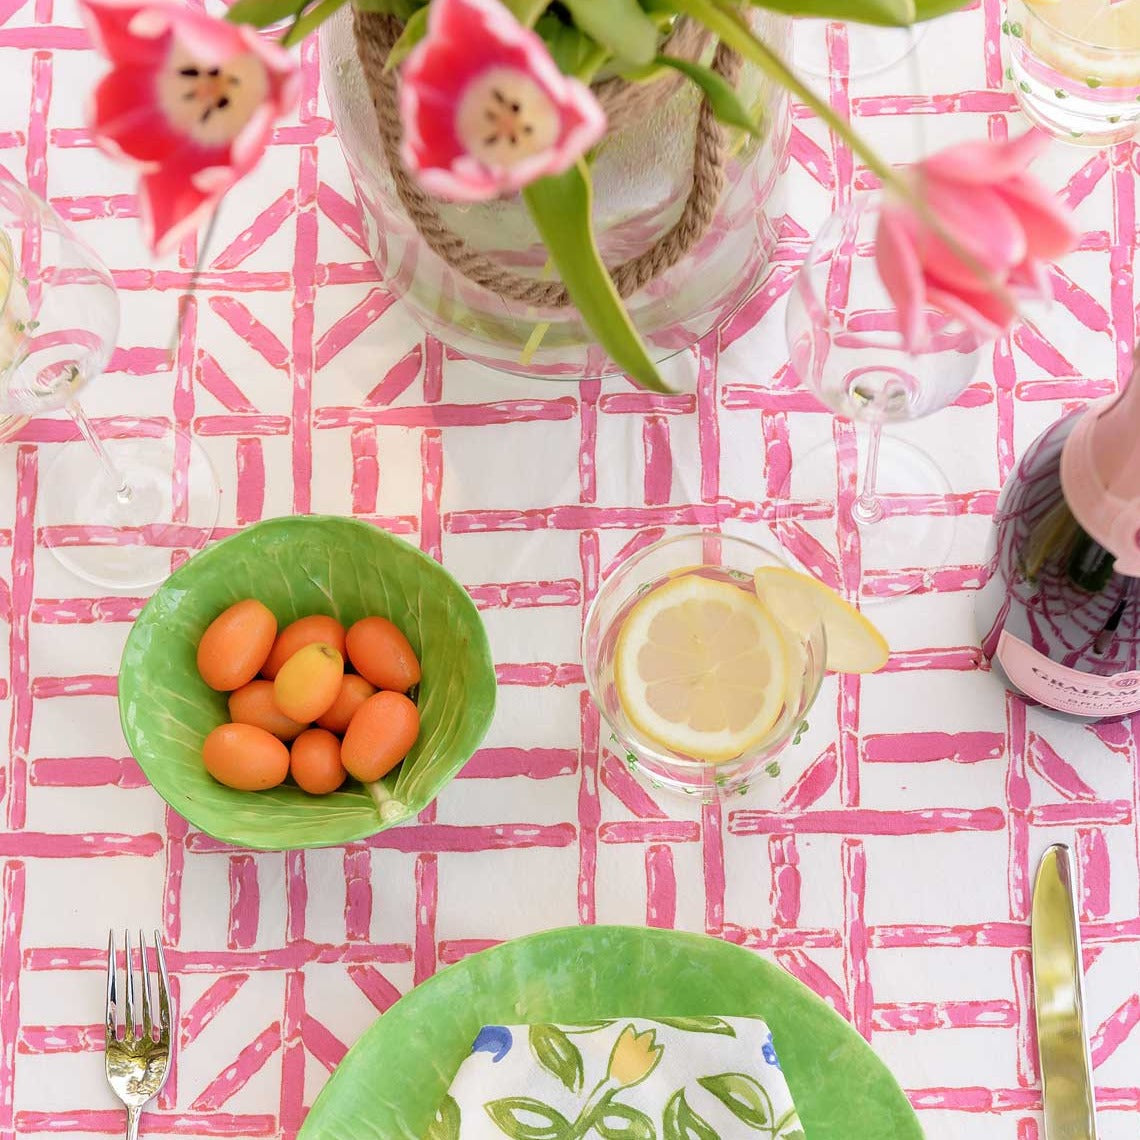 Rose Bamboo Tablecloth with pink flowers and green dishes.